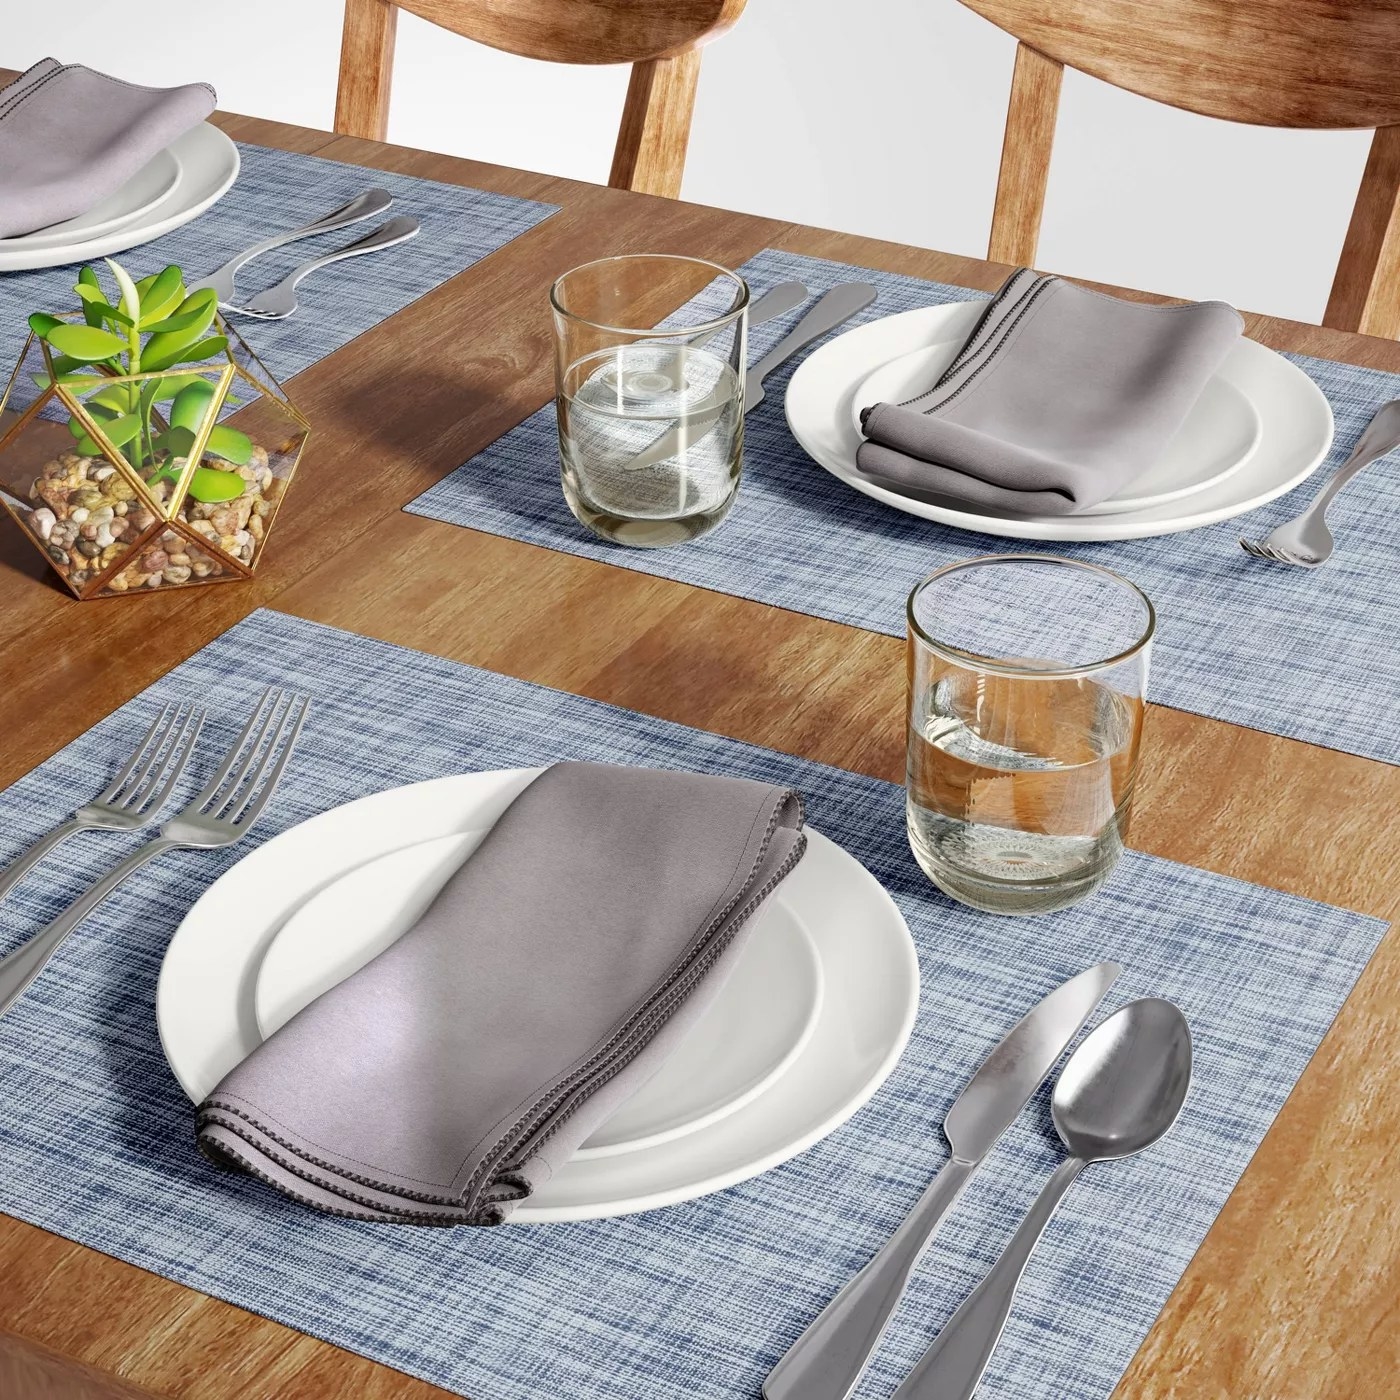 The blue placemats on a table underneath two place settings